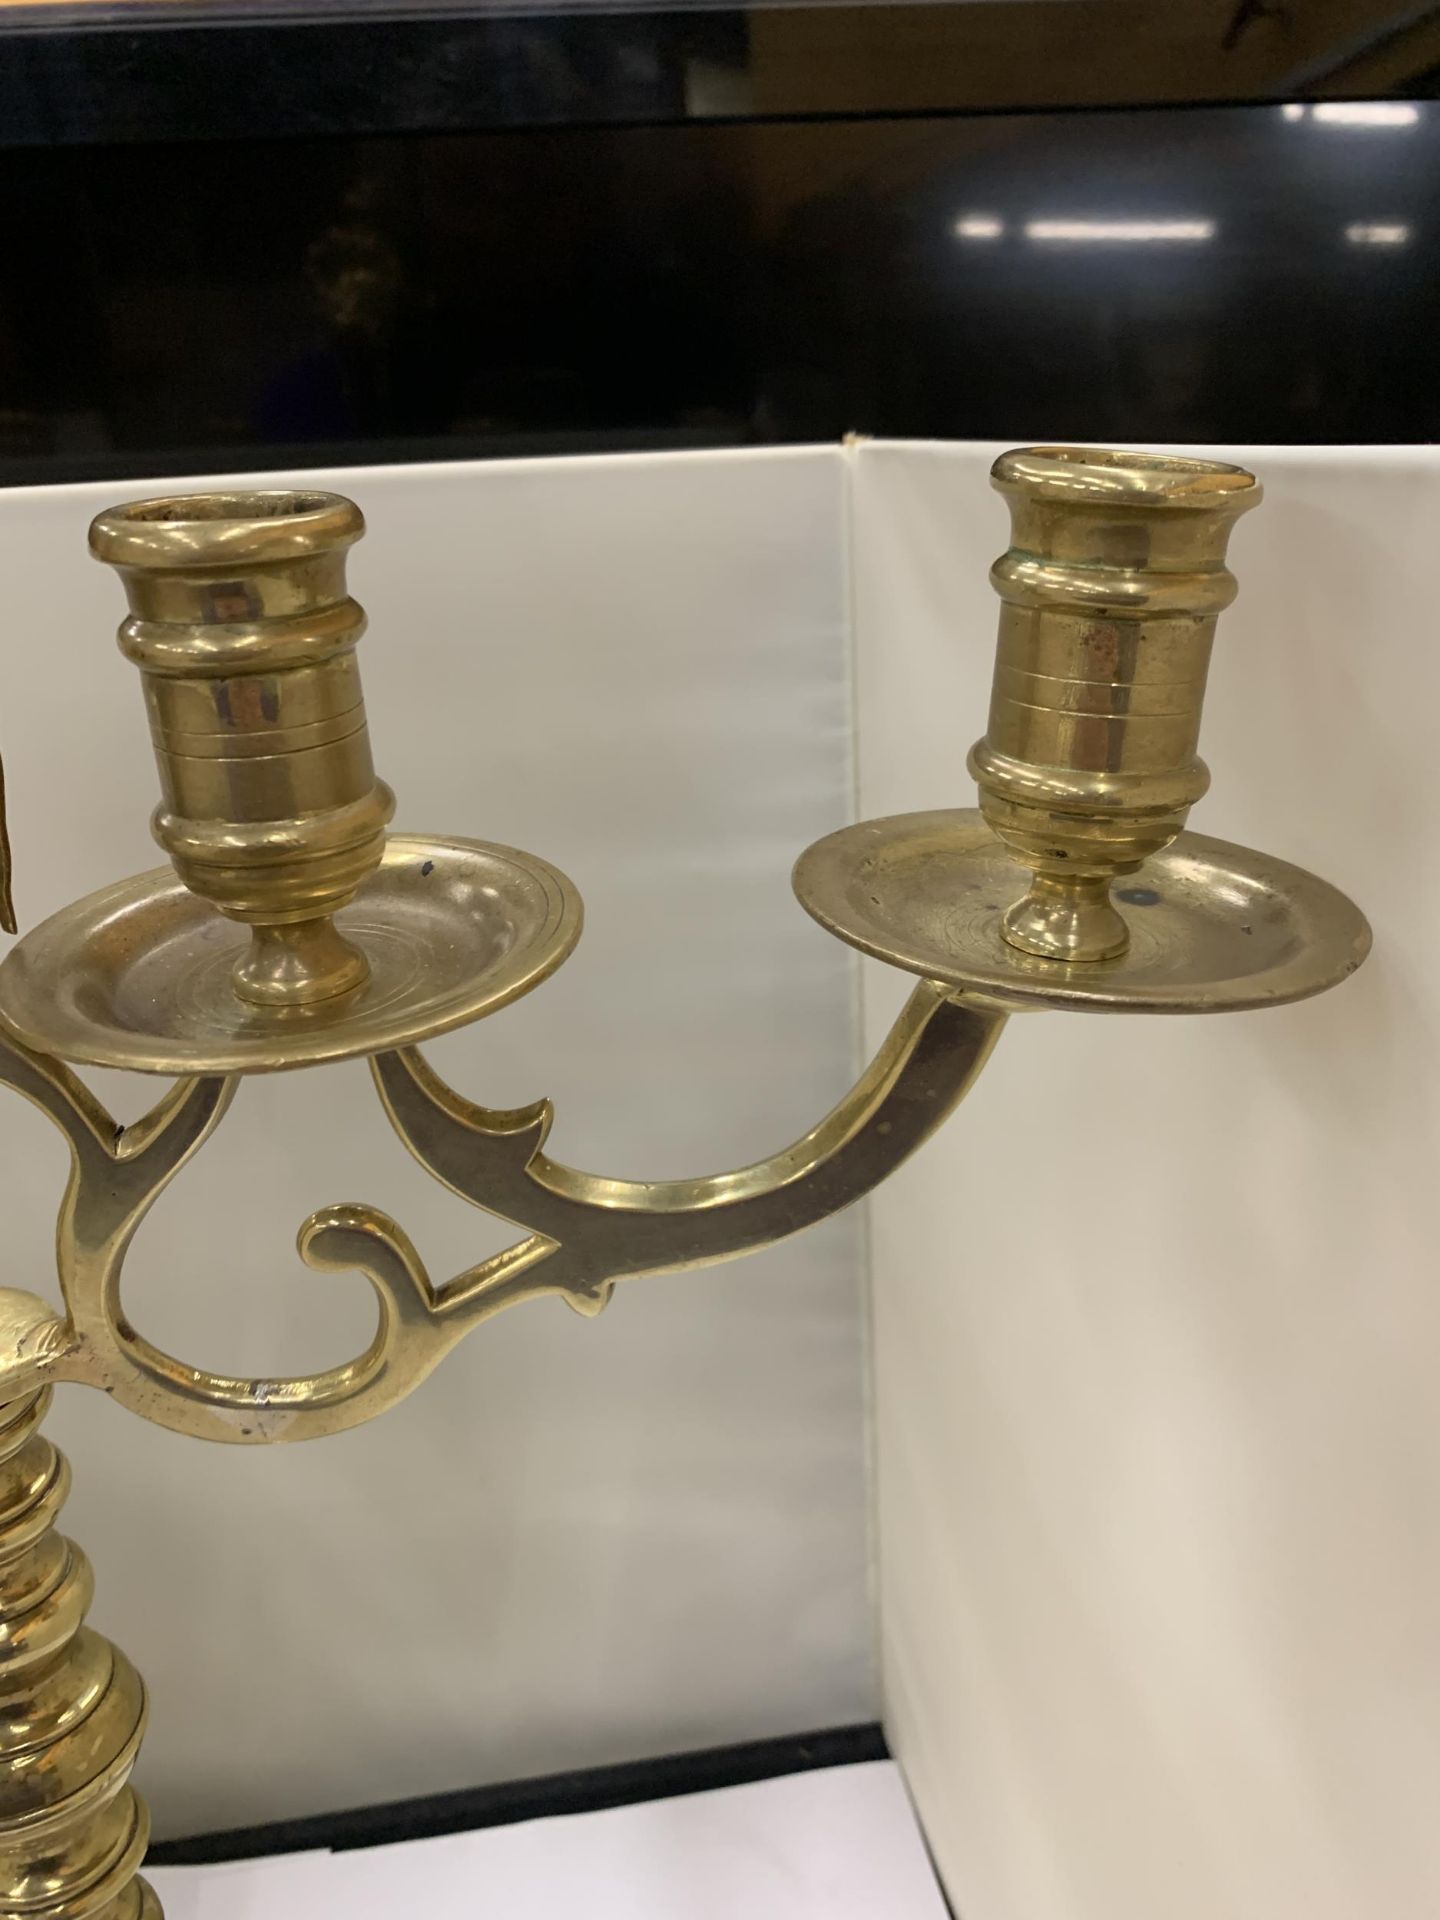 A HEAVY BRASS CANDELABRA WITH A FIGURE HOLDING A STAFF - Image 4 of 5